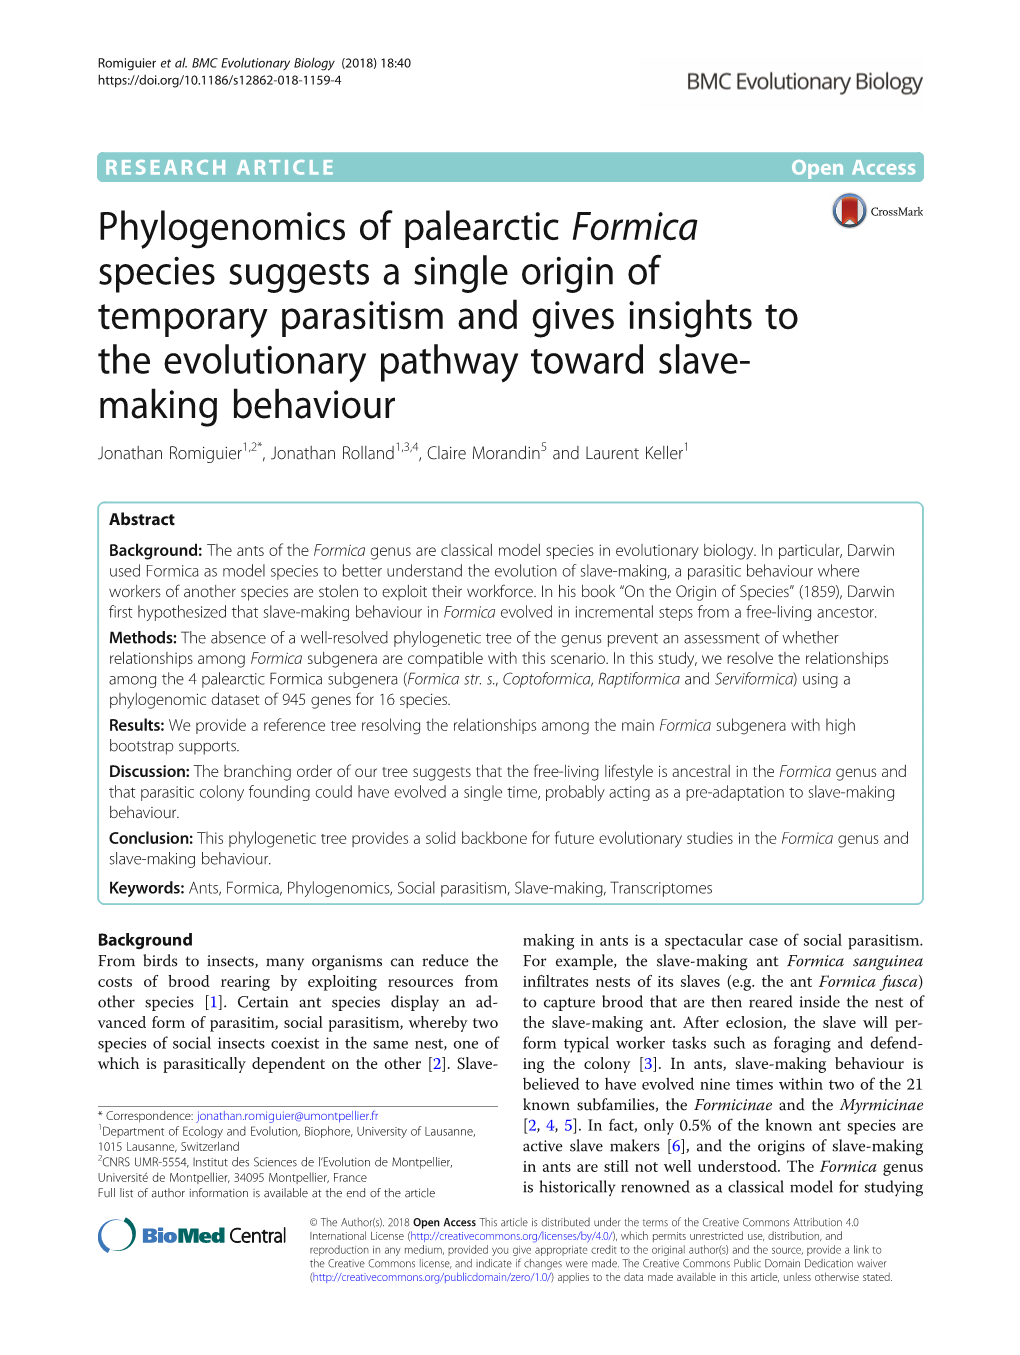 Phylogenomics of Palearctic Formica Species Suggests a Single Origin Of